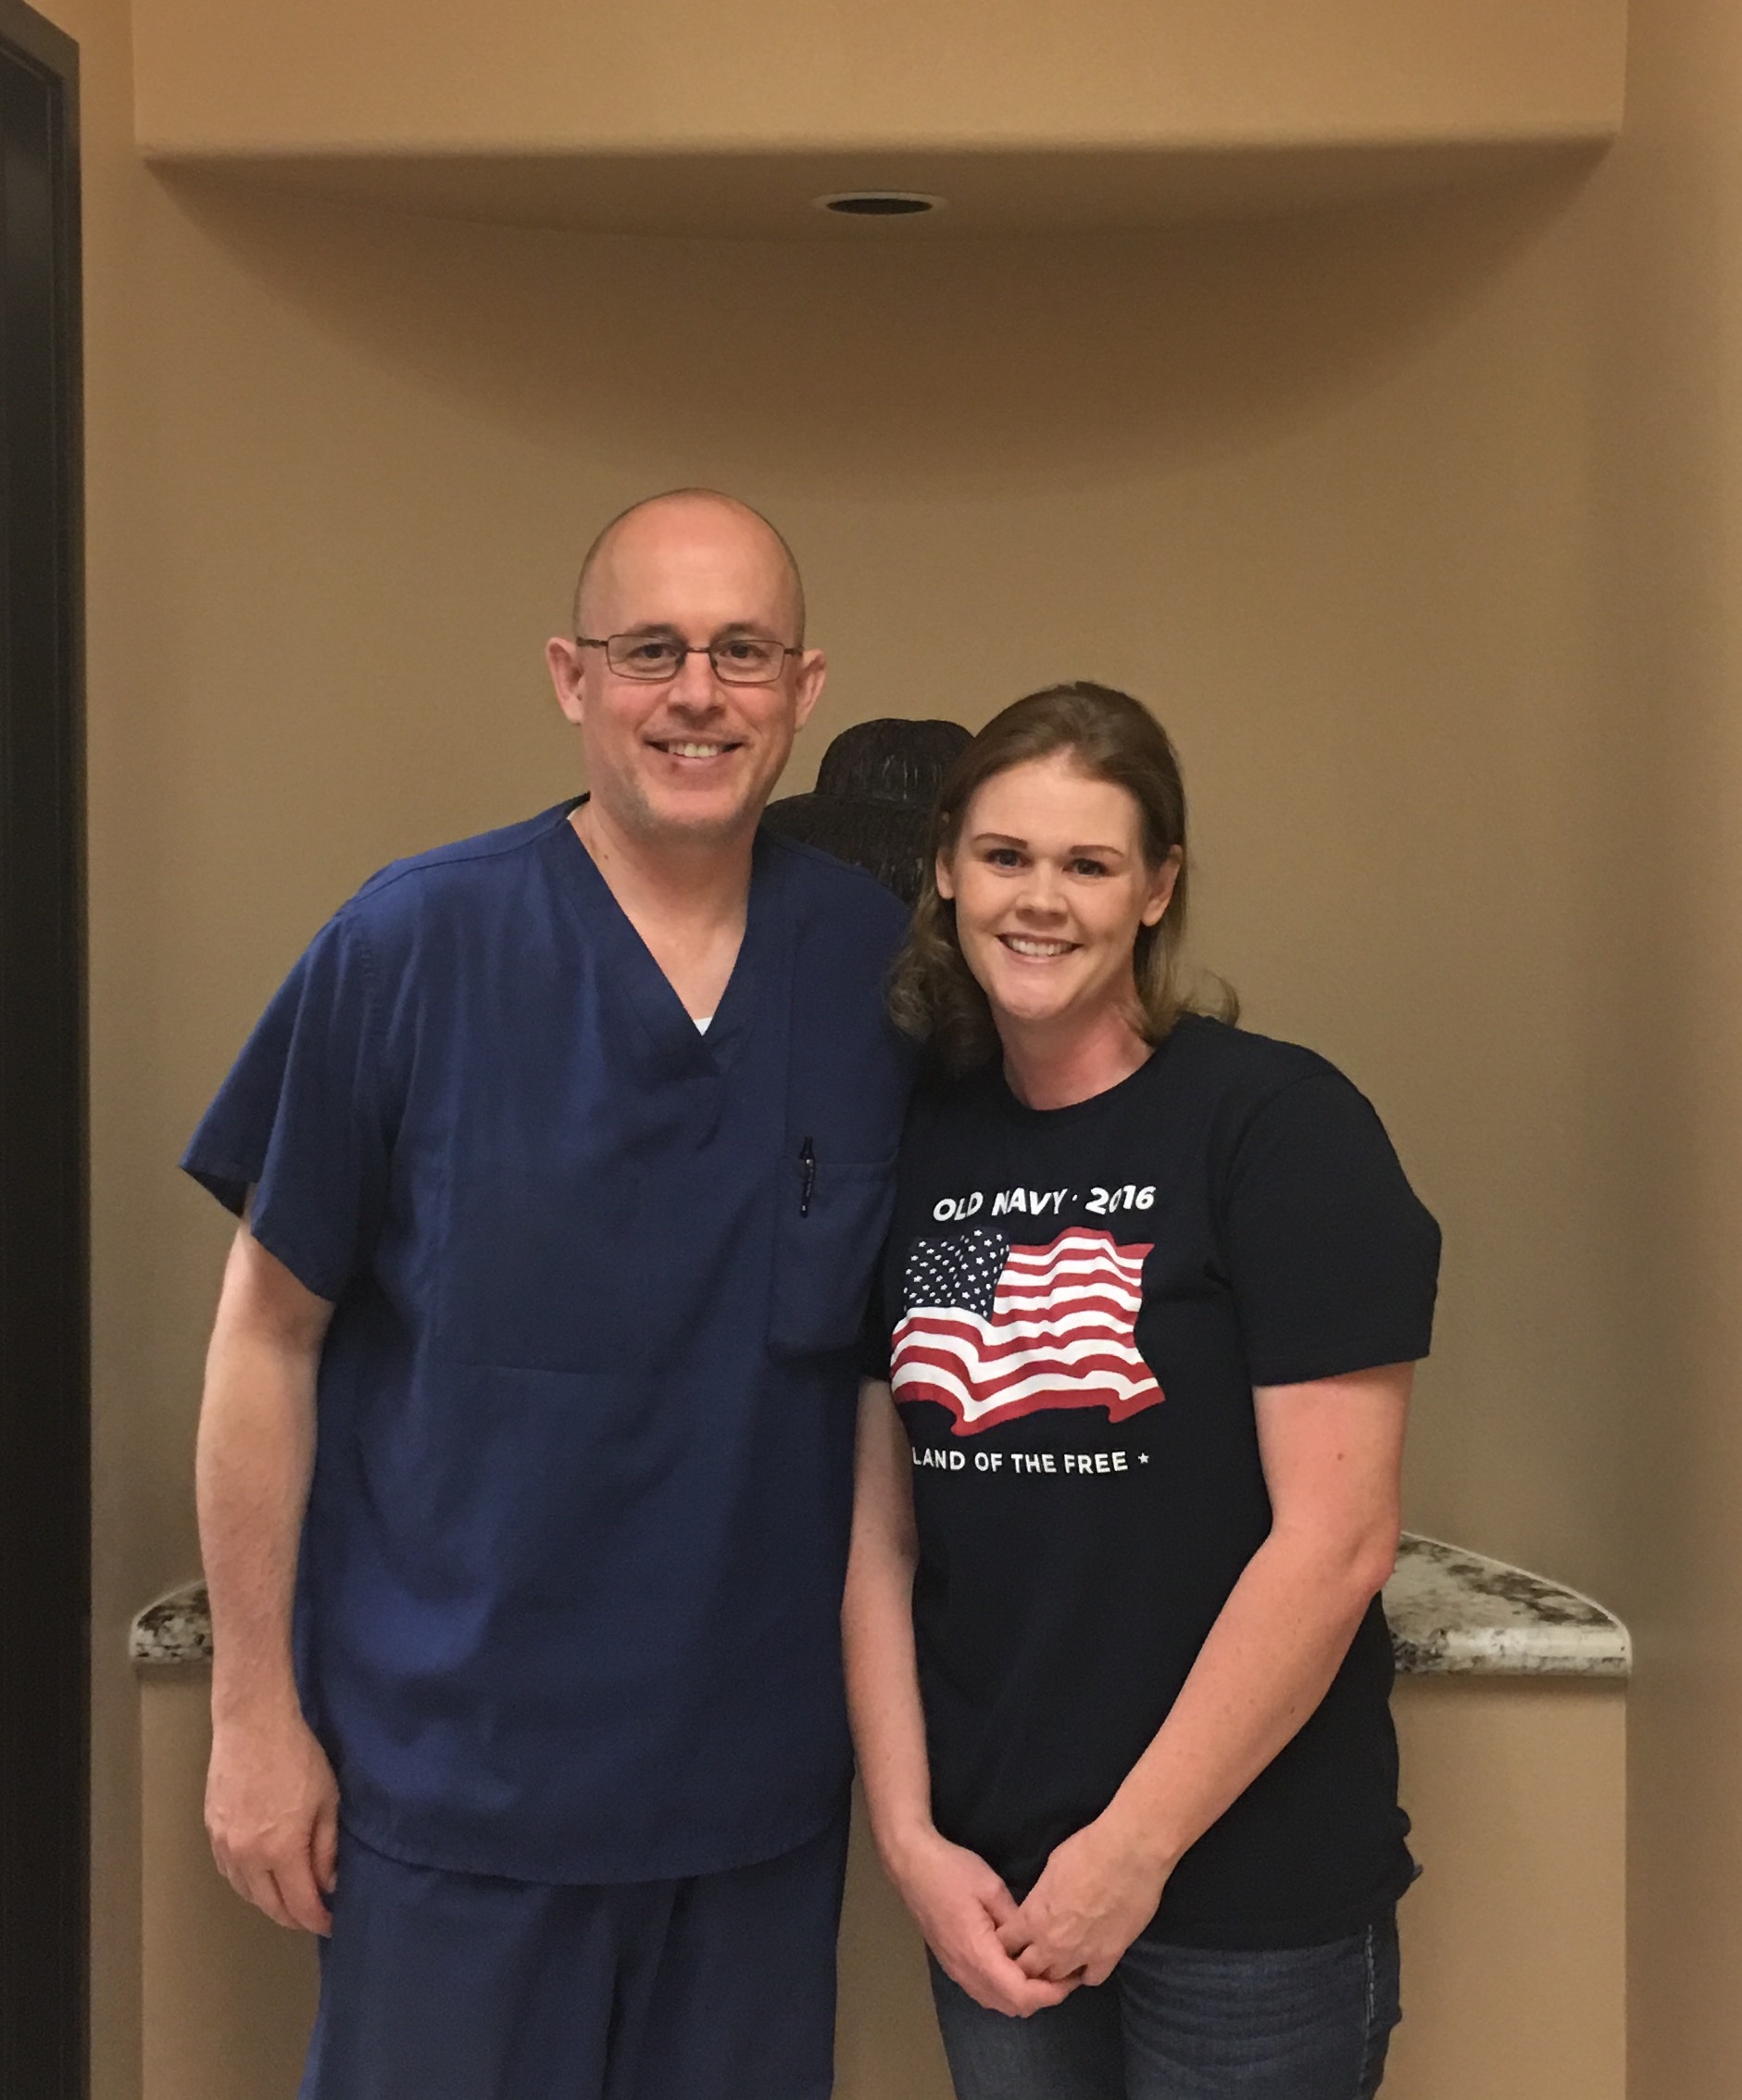 Jodee is grateful to have found Dr. Tollestrup who disconnected nerves in her foot to get rid of the pain.